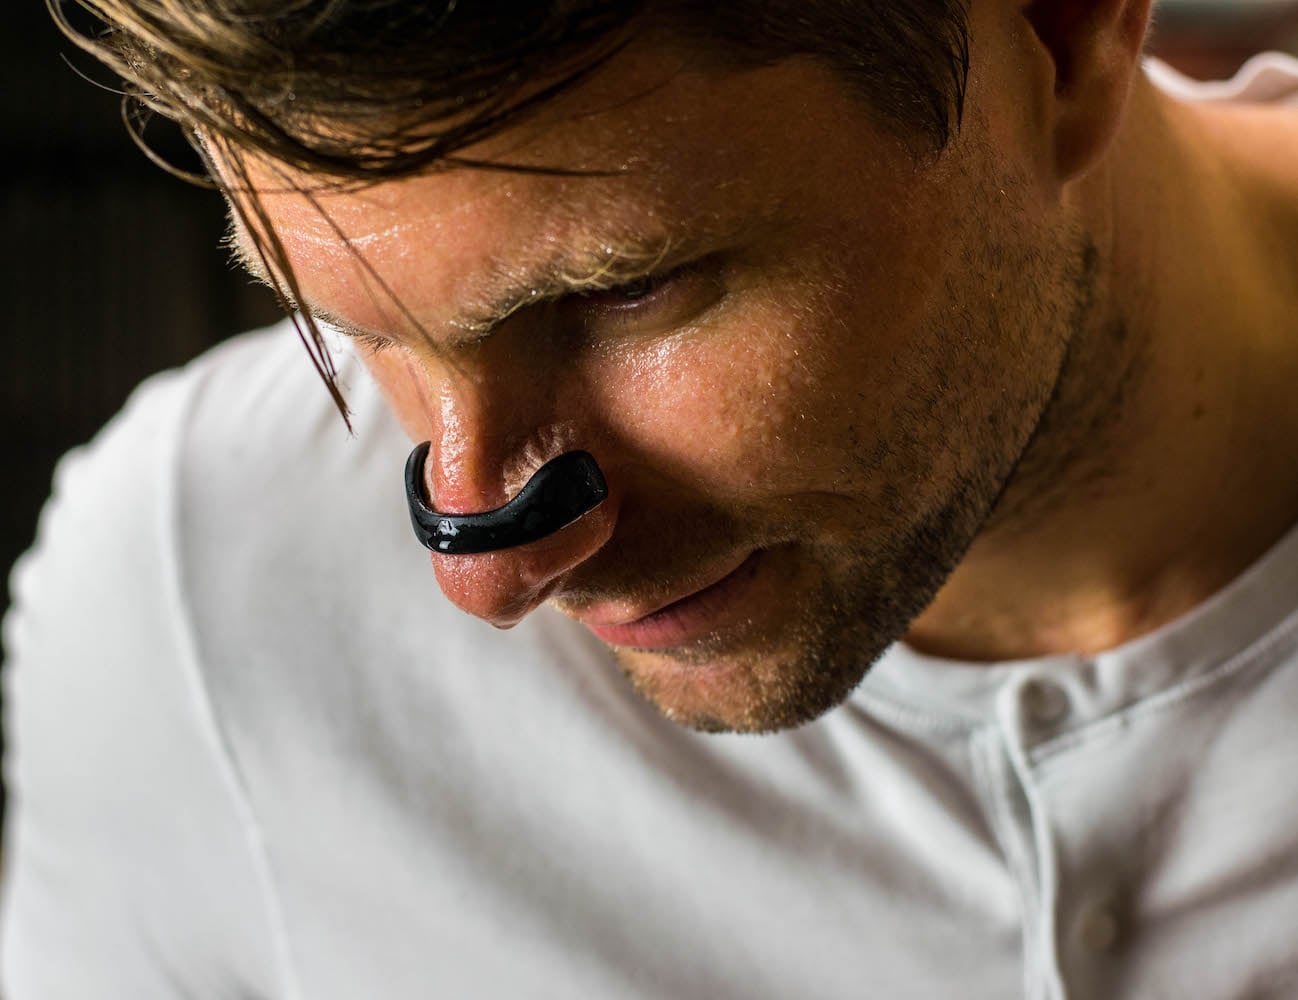 Intake Breathing Magnetic Nasal Band helps you breathe deeply during activity